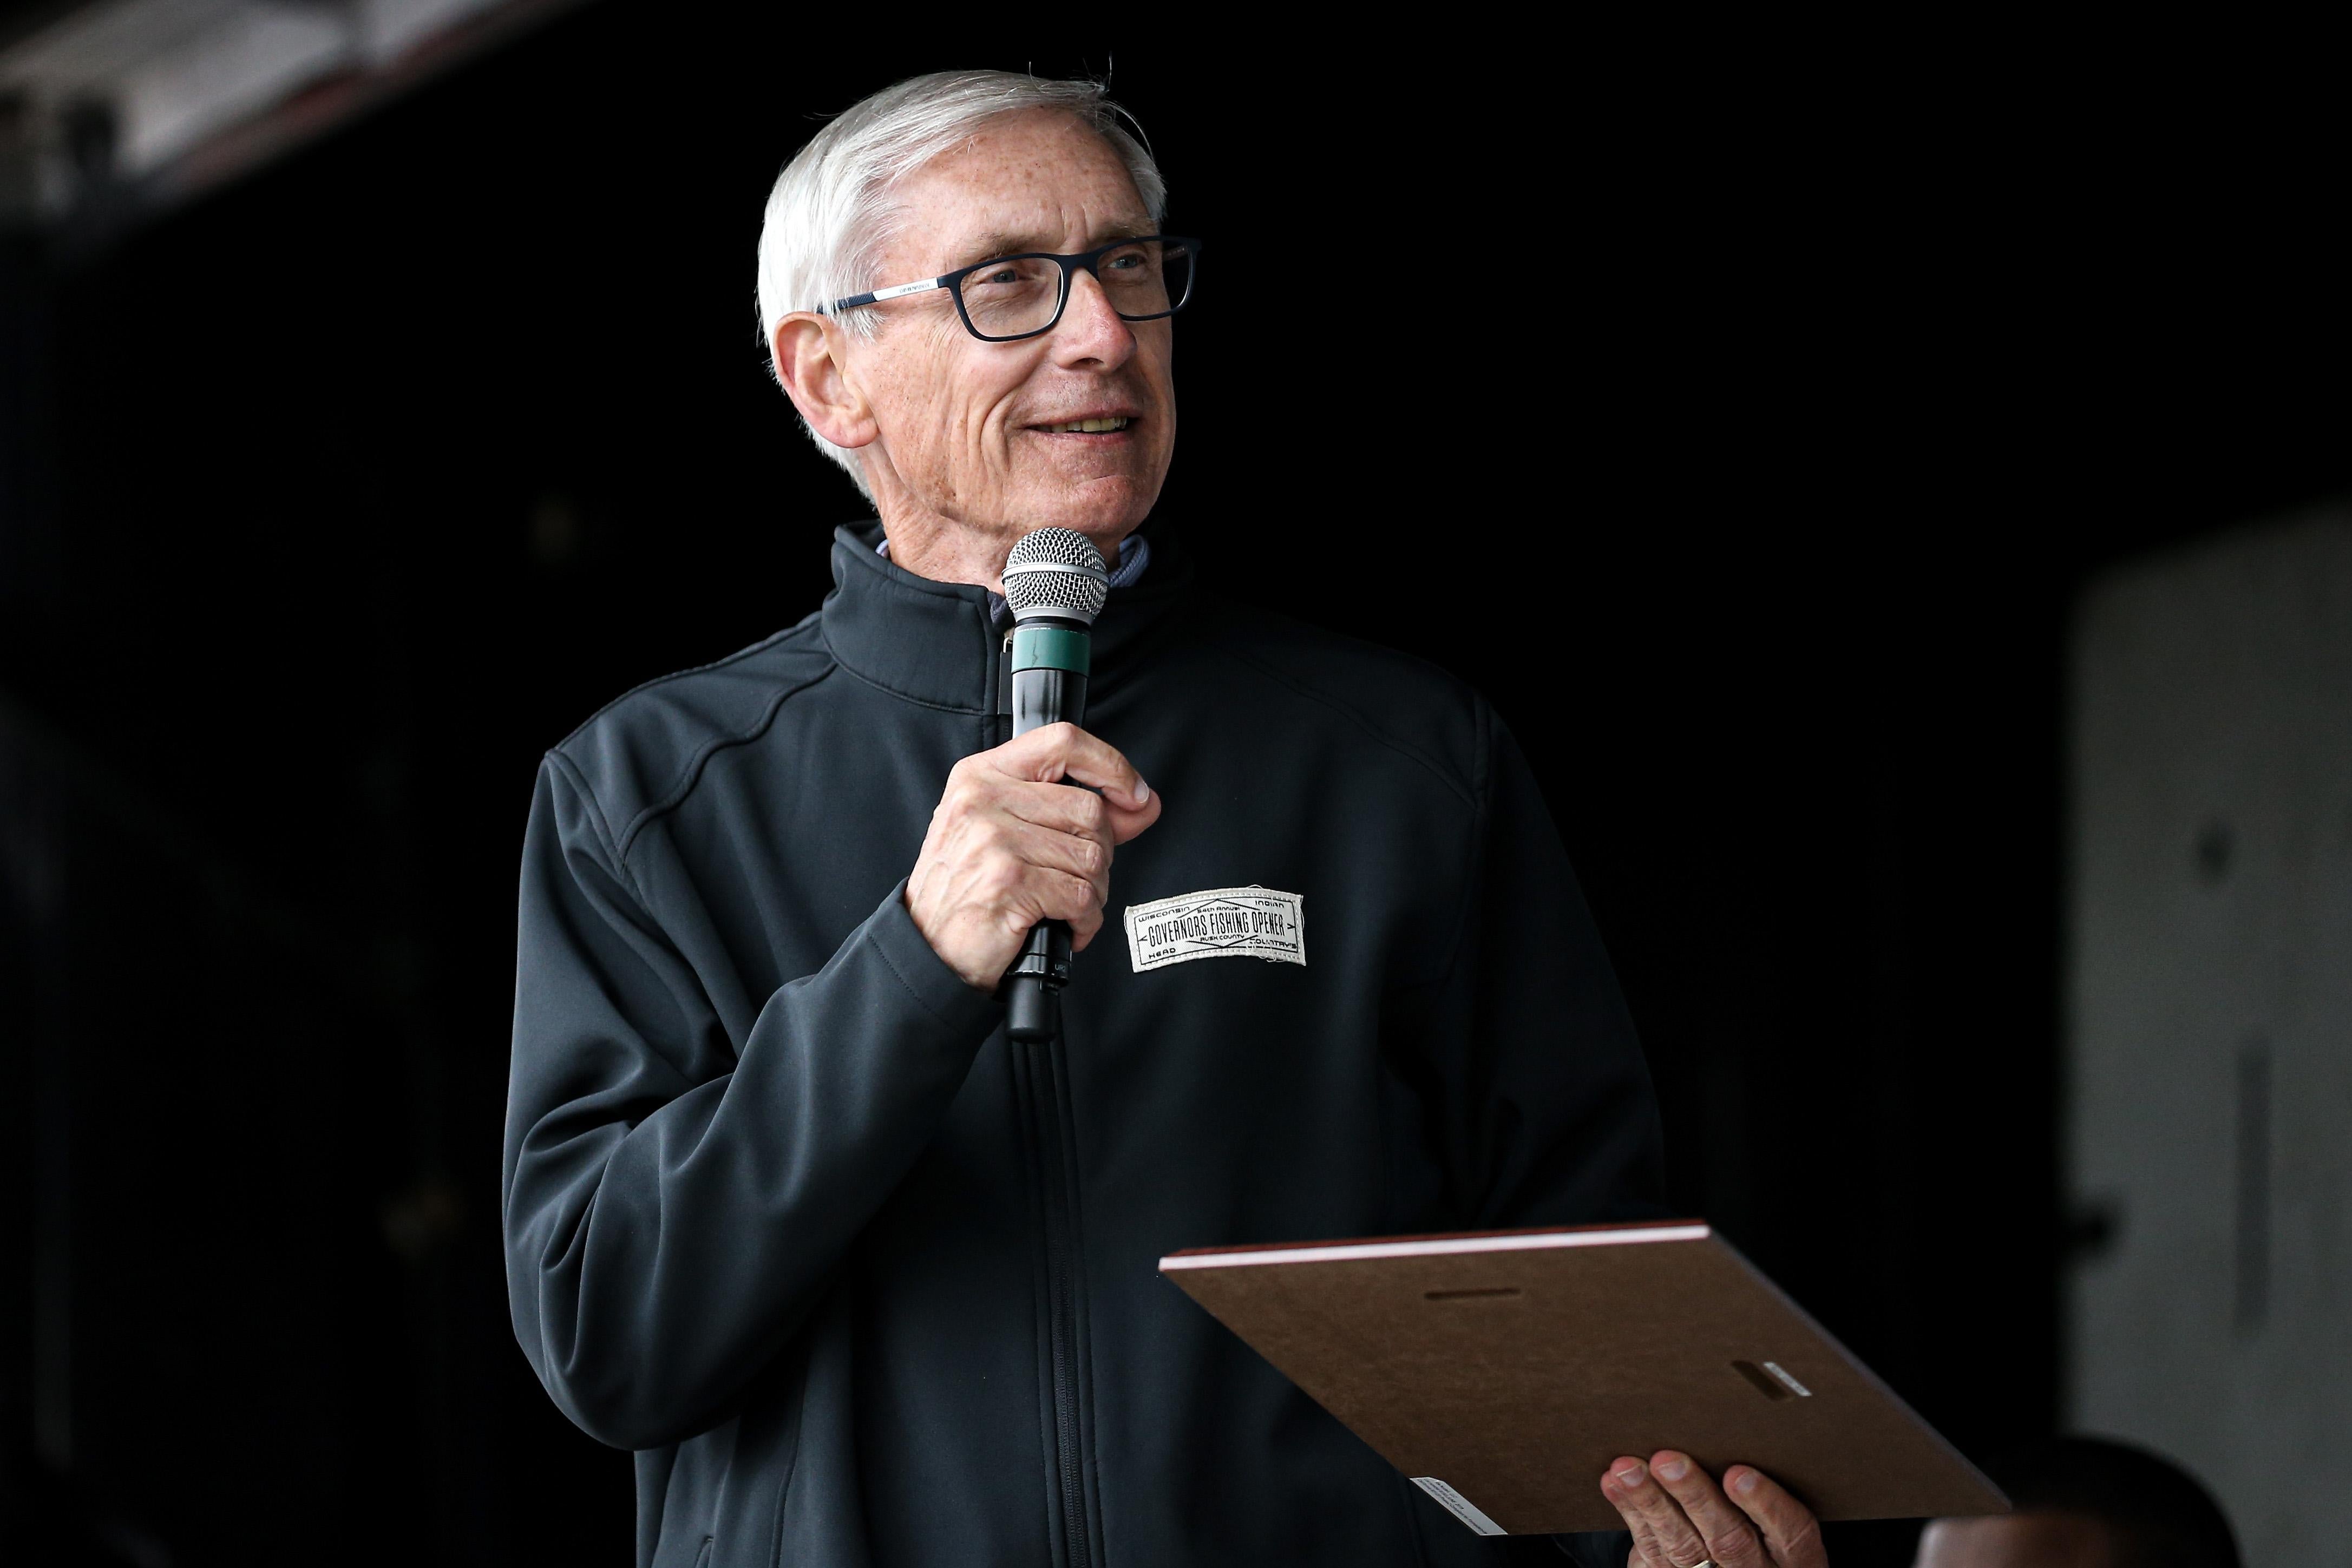 Evers speaks to the crowd, holding a mic in one hand and a clipboard in the other